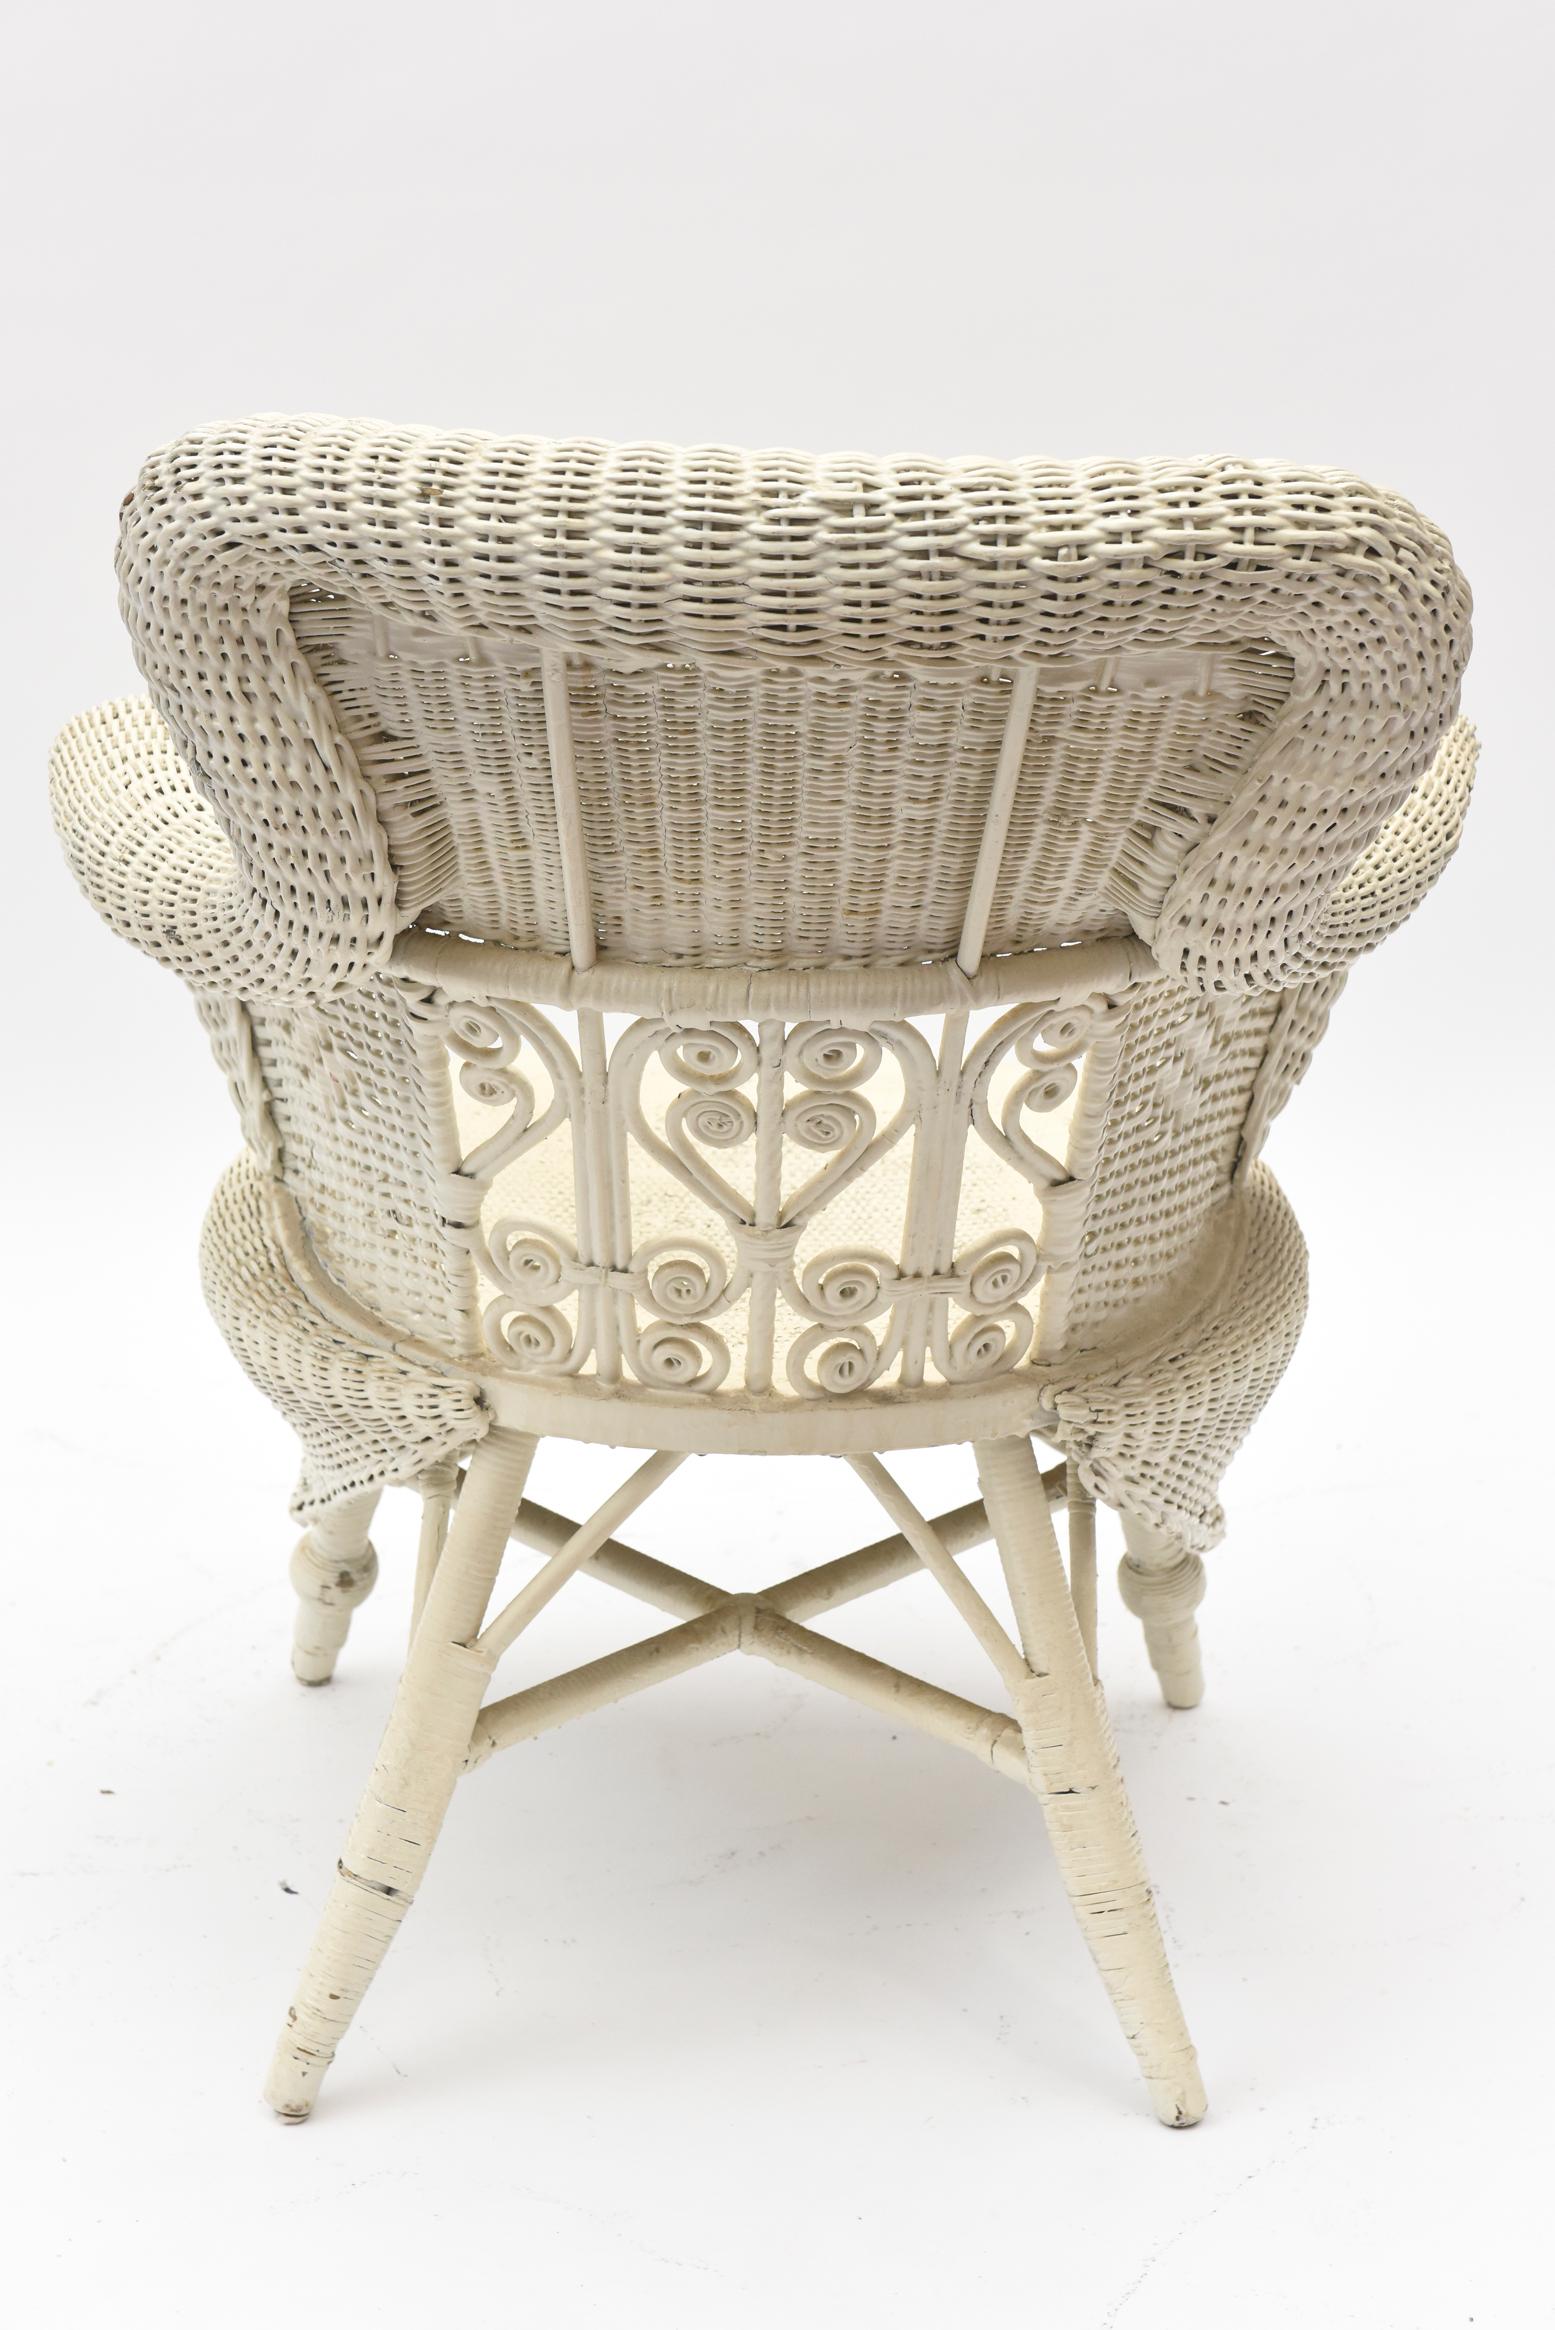 Victorian Wicker Parlor Set ‘His, Her and Child's’ Chairs, Settee and Rocker For Sale 8